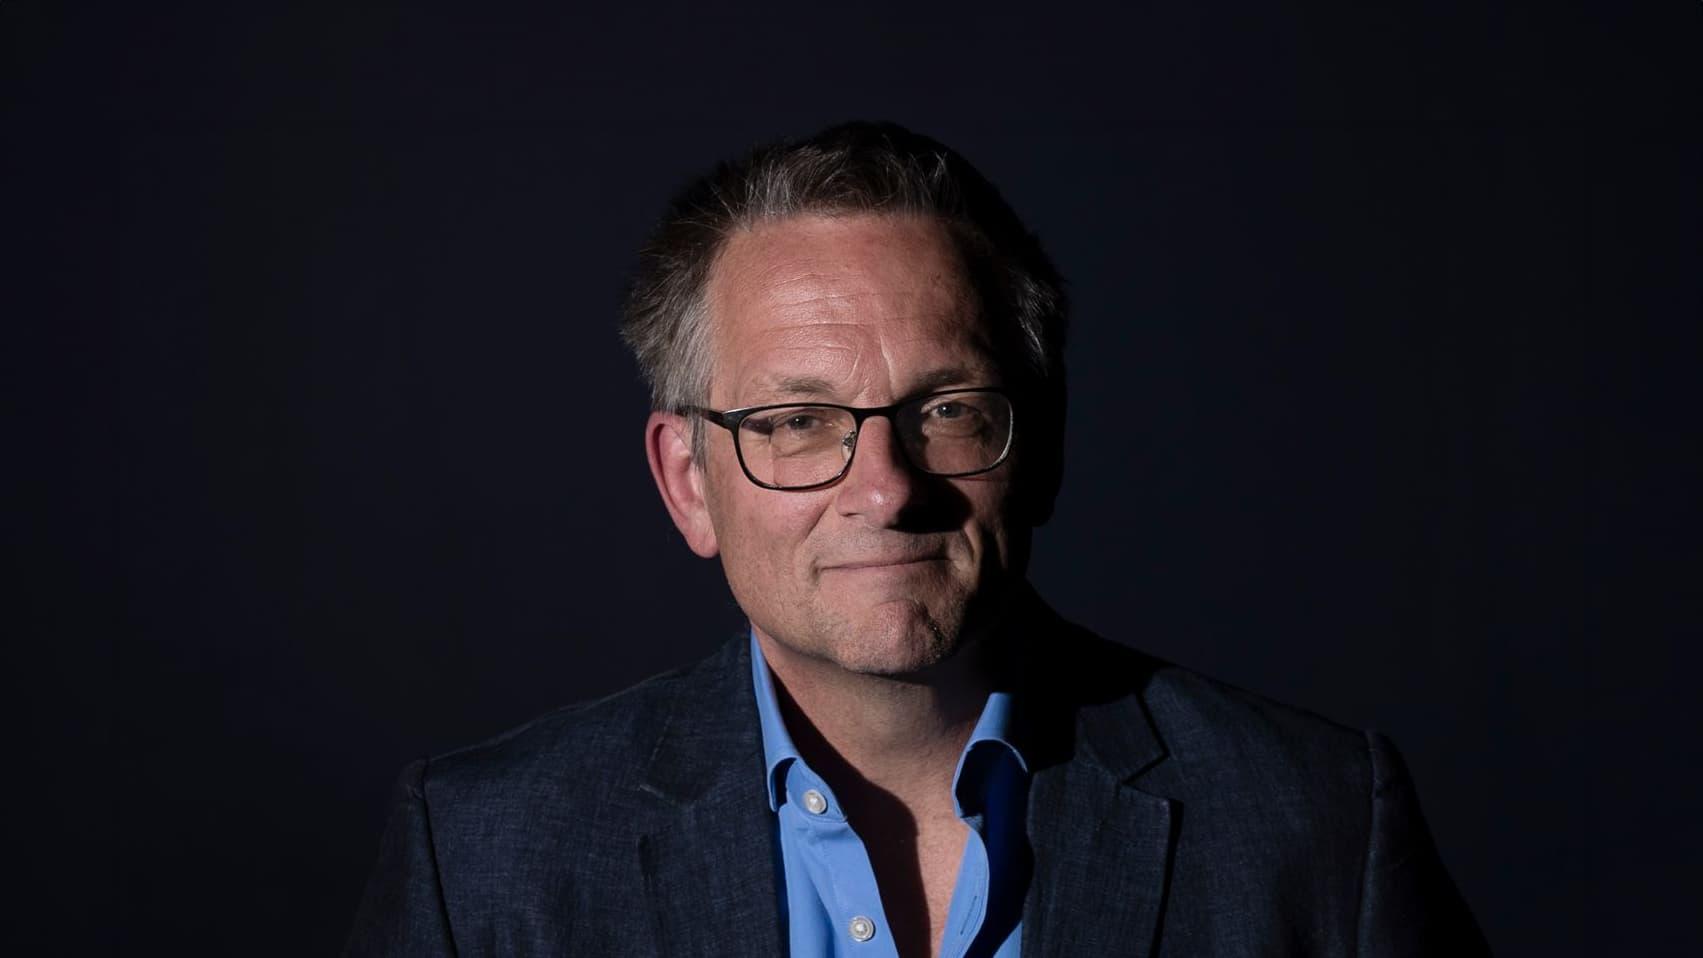 Michael Mosley The Doctor That Changed Britain backdrop